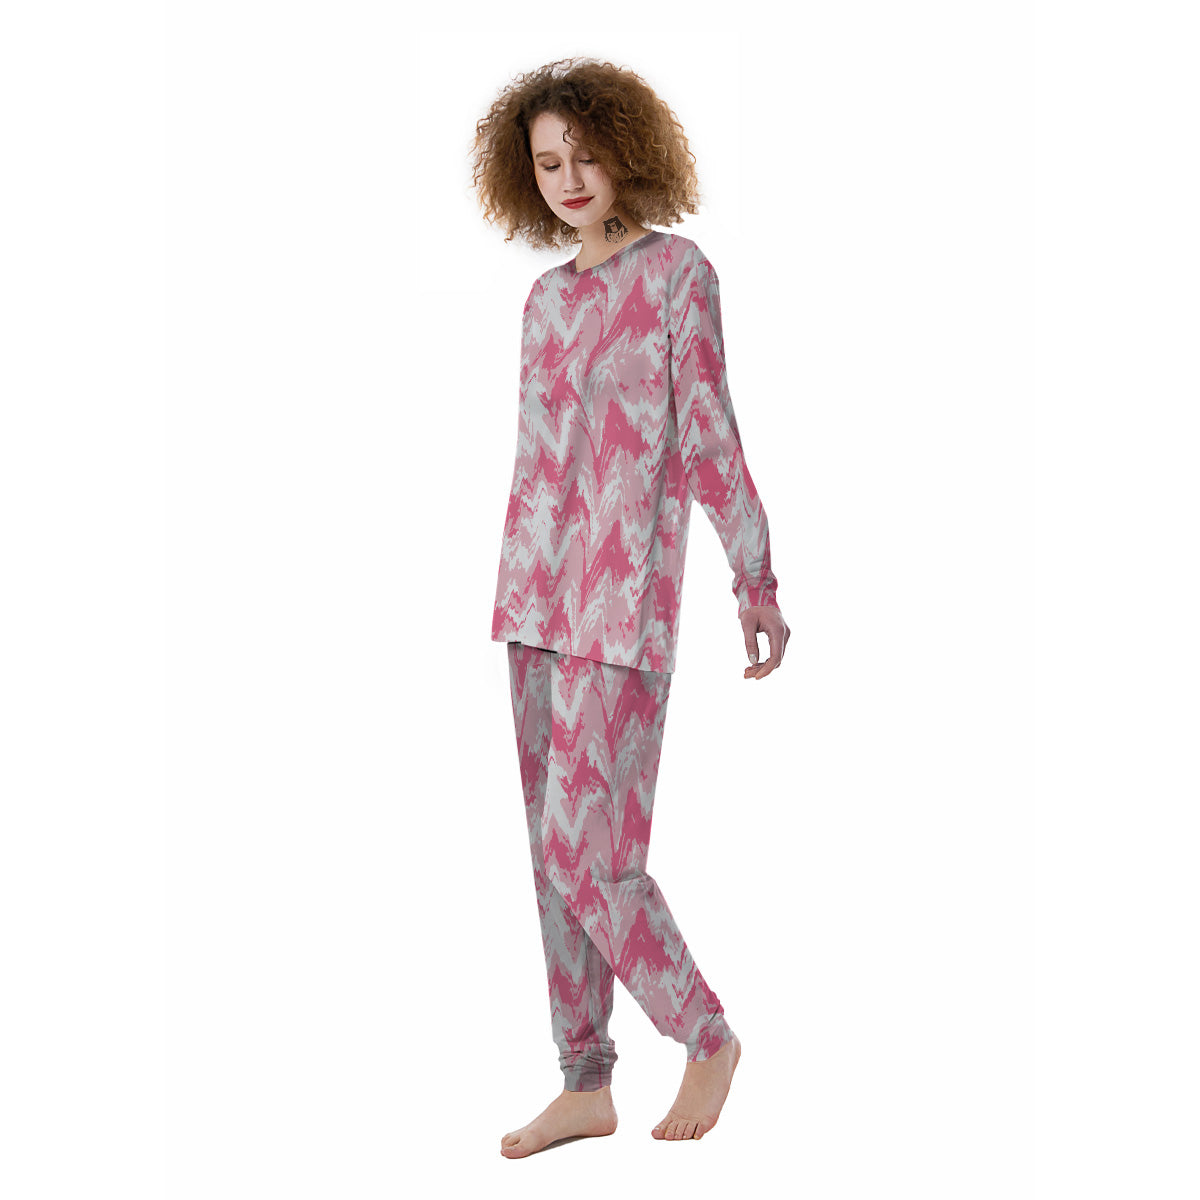 Zigzag Abstract Stripes Pink Print Pattern Women's Pajamas-grizzshop